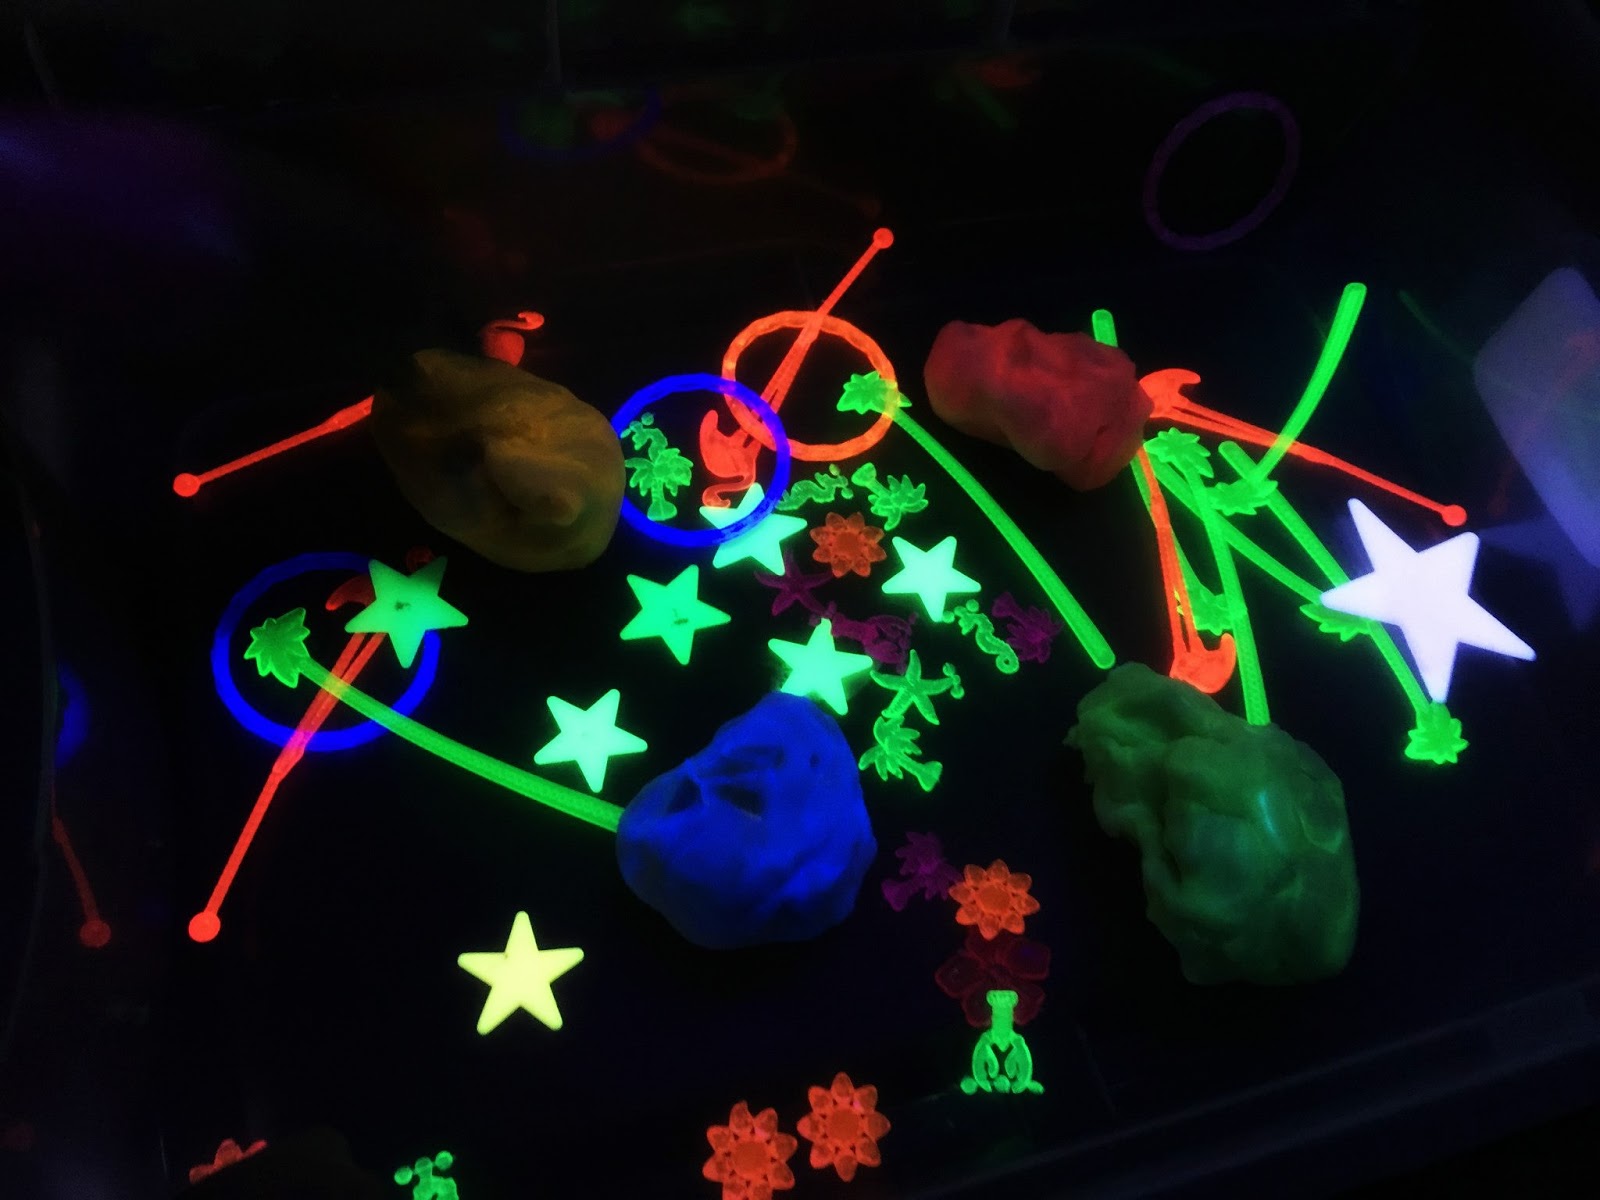 Keep kids busy without screens with this glow-in-the-dark rock